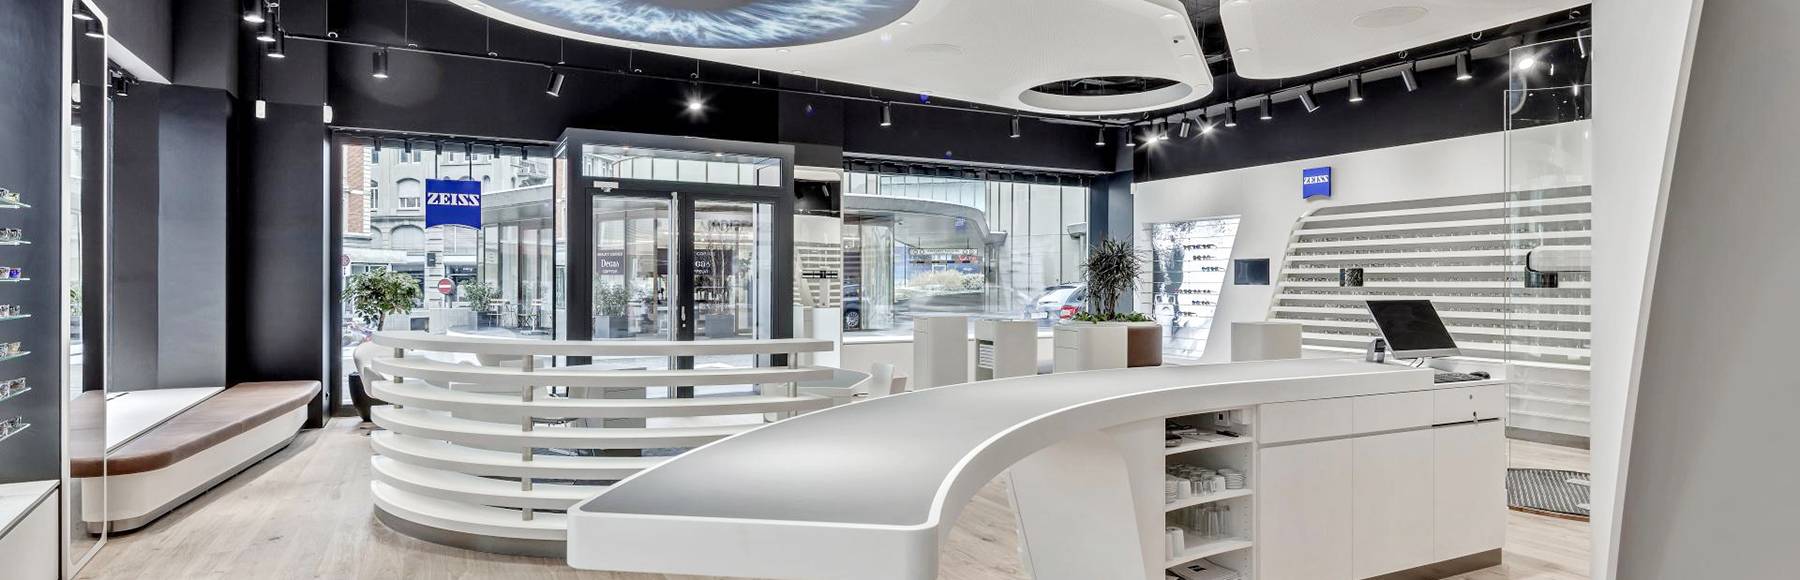 ZEISS Vision Center by Rivoli Vision